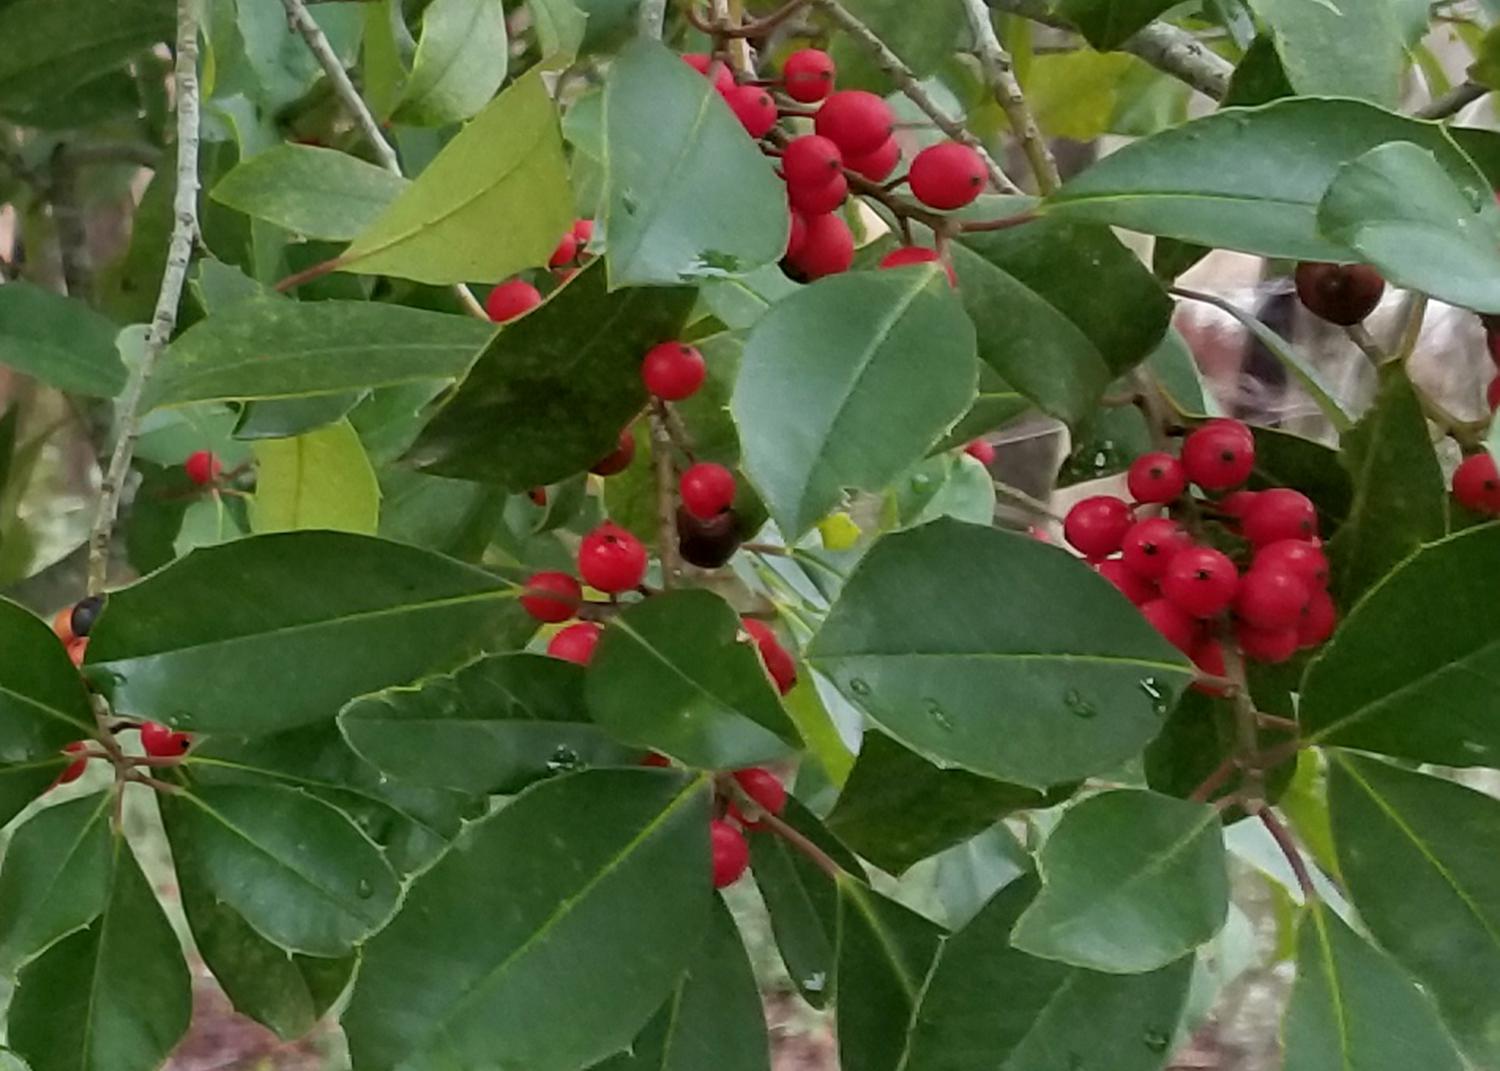 A branch has green leaves and clusters of red berries along its length.